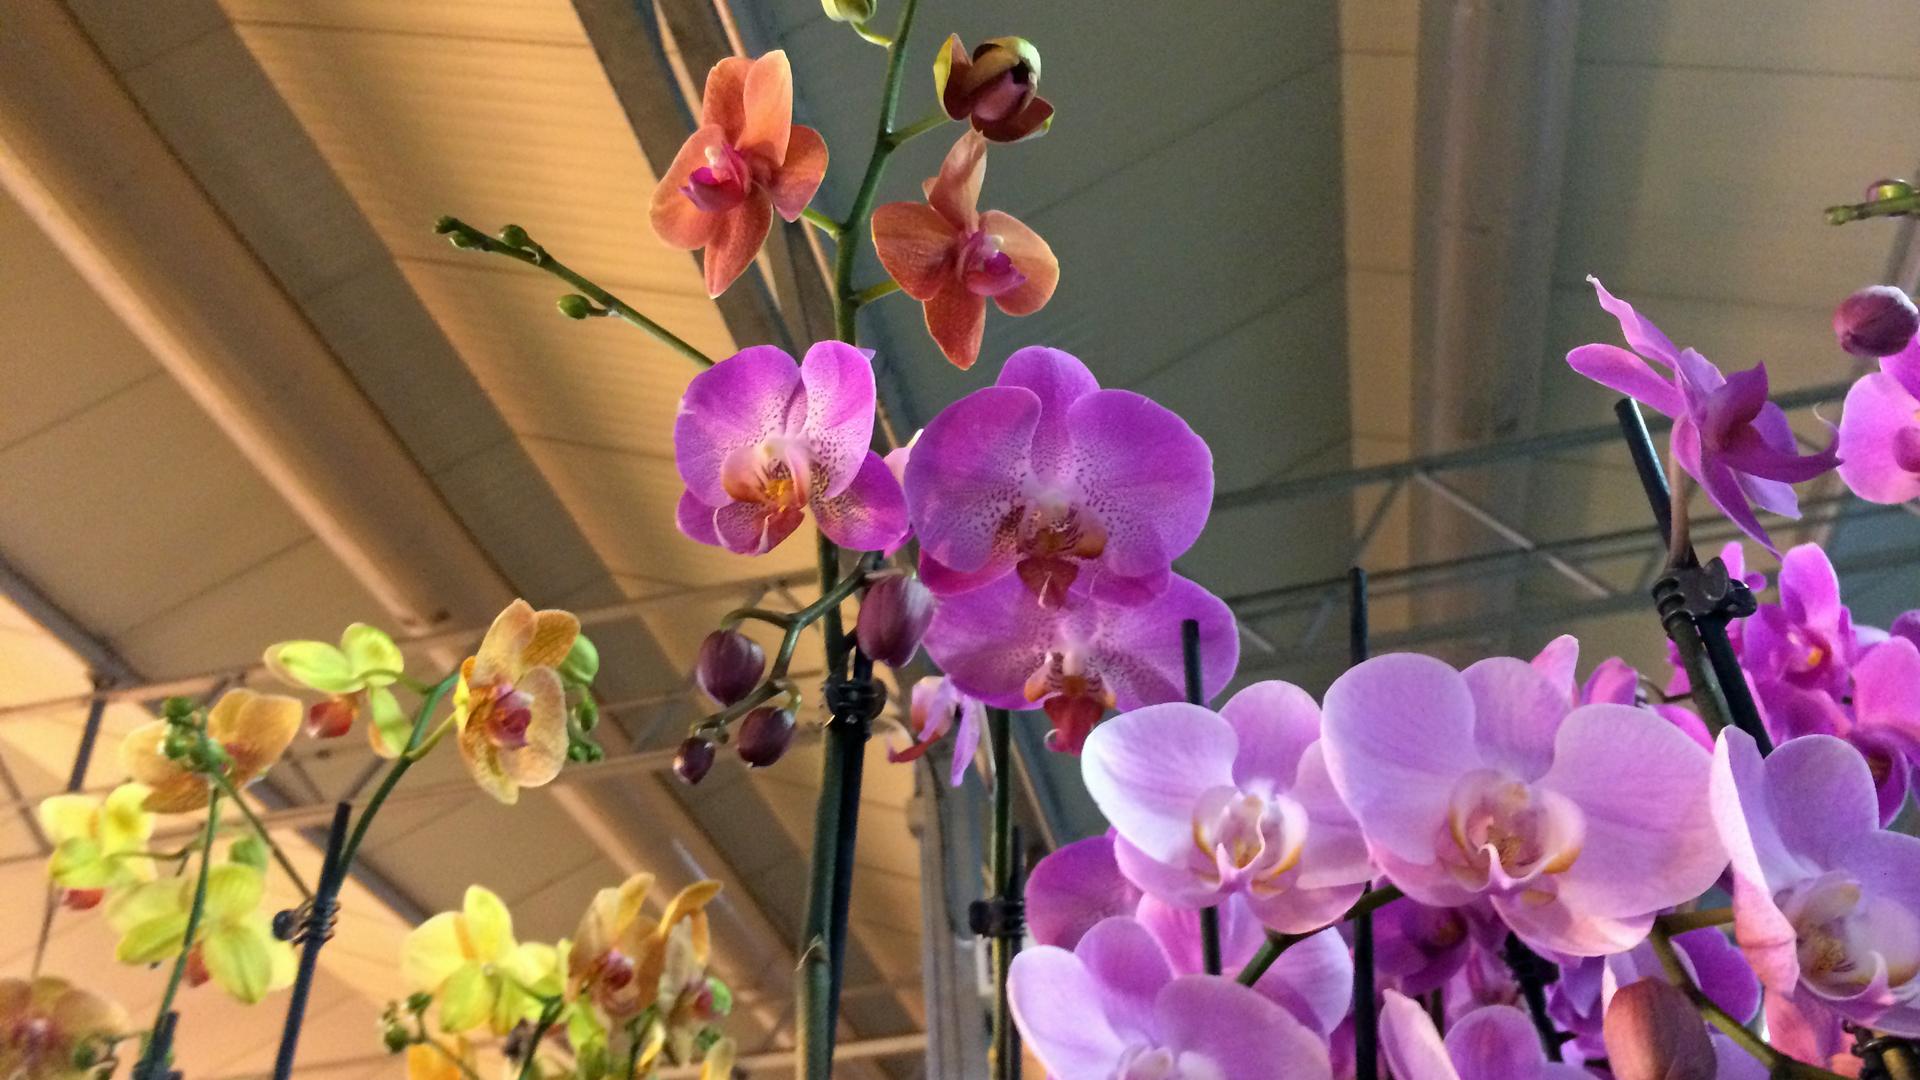 An orchid plant at Green Circle Growers in Oberlin, Ohio.